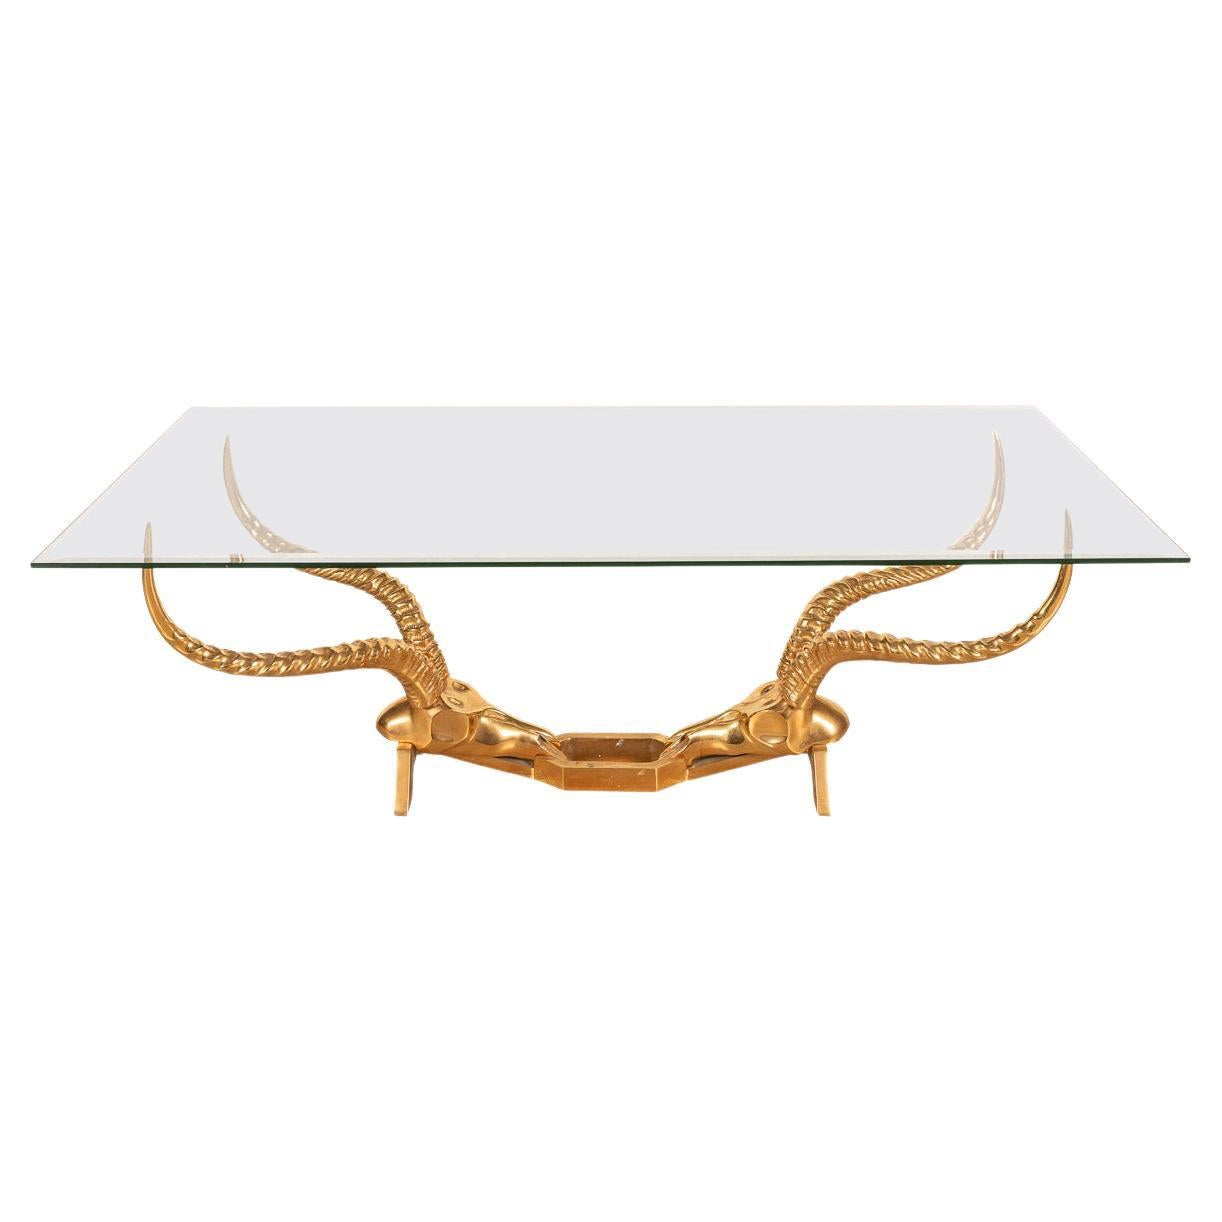 20th Century "Antelope" Coffee Table by Dikran Khoubesserian for Fondica, c.1970 For Sale